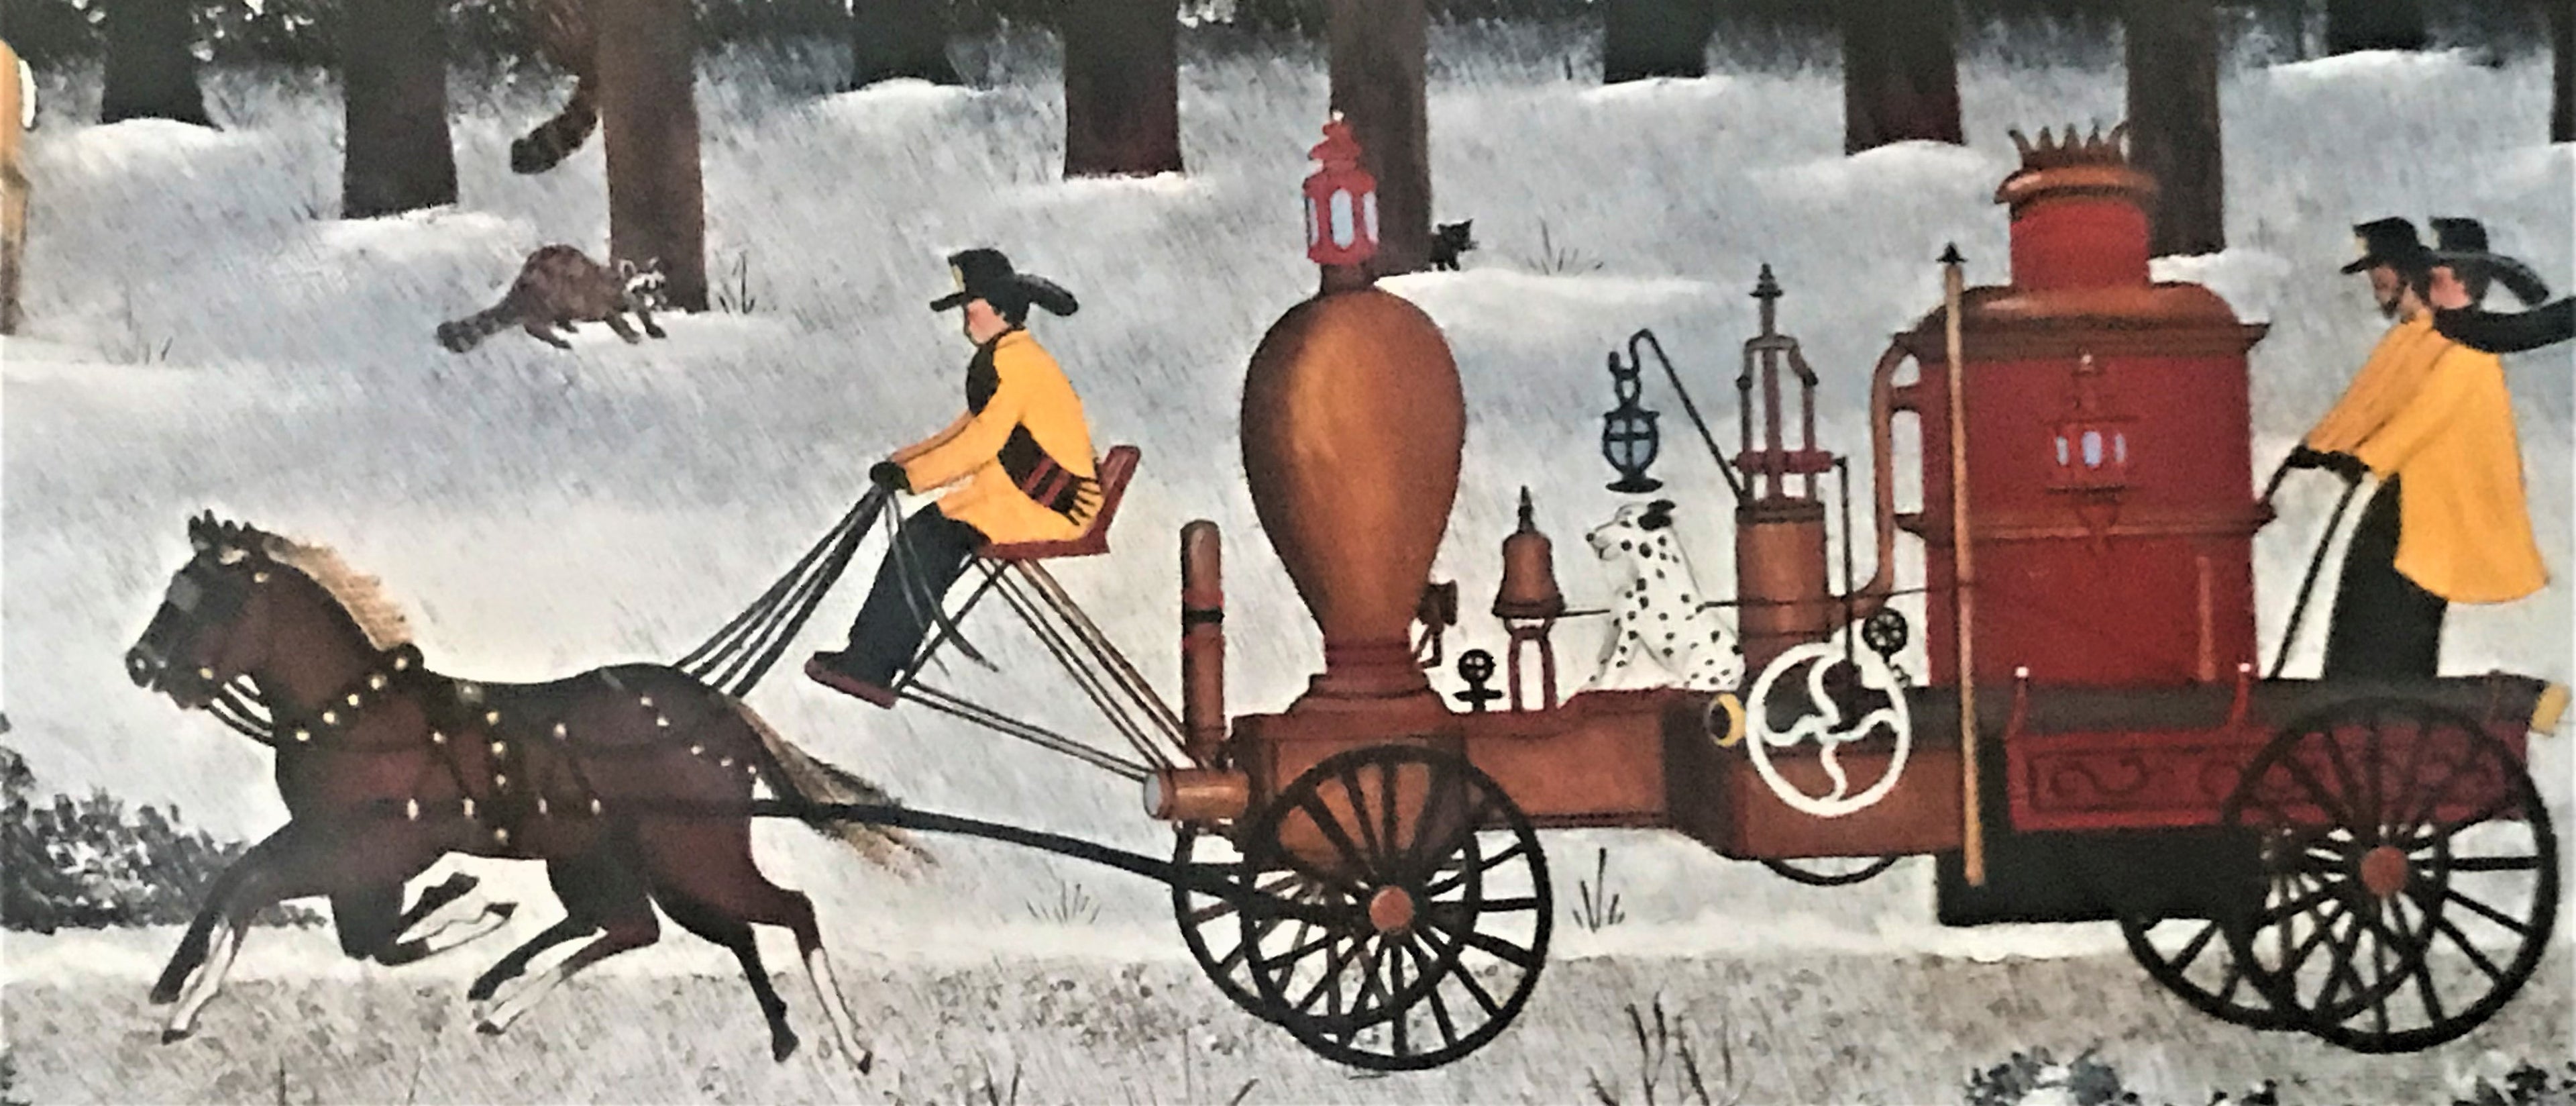 Dashing Through the Snow Jane Wooster Scott Lithograph Print Artist Hand Signed and Numbered